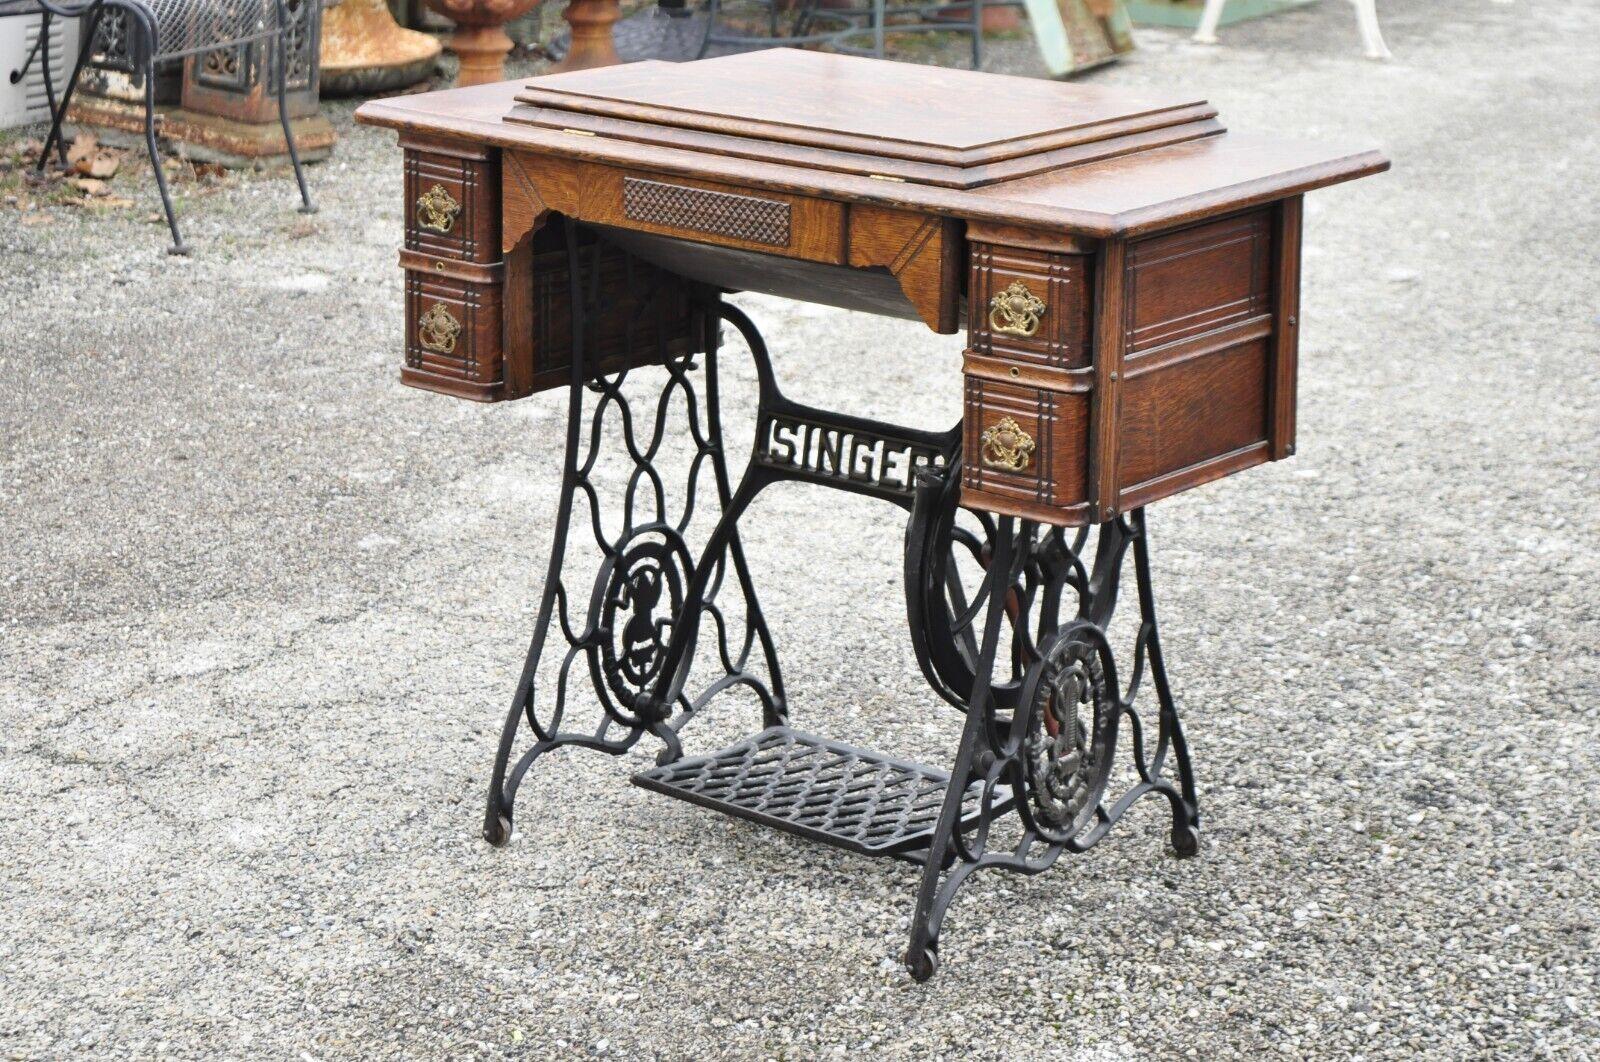 Antique Singer Sewing Table With Machine for Sale in Houston, TX